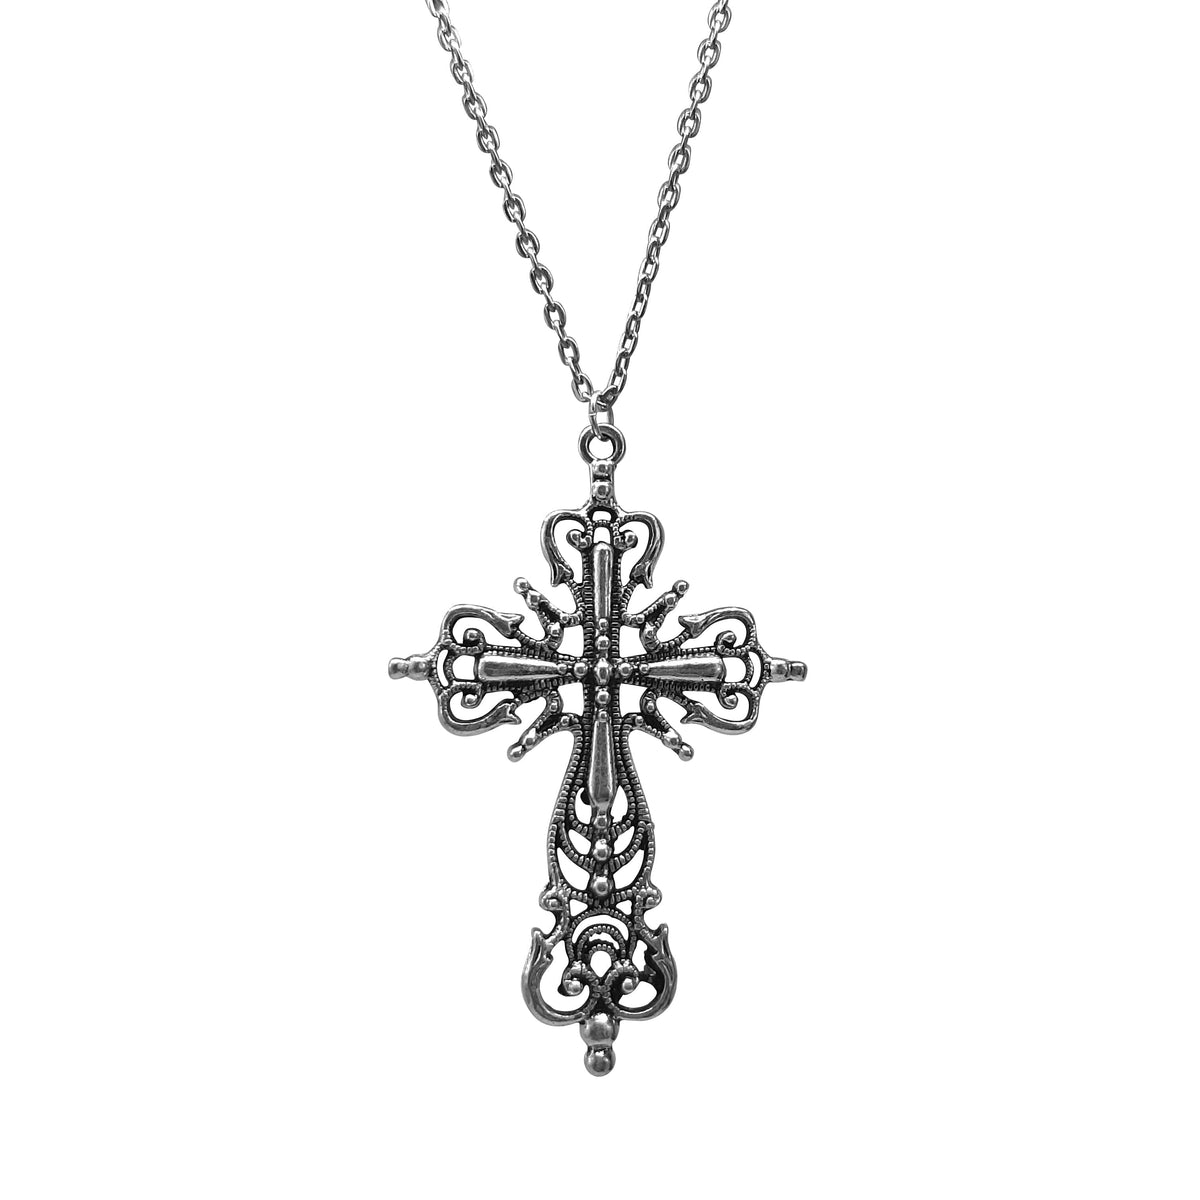 Gothic Design Cross Pendant Necklace Fashion Jewelry Necklace A Moment Of Now Women’s Boutique Clothing Online Lifestyle Store